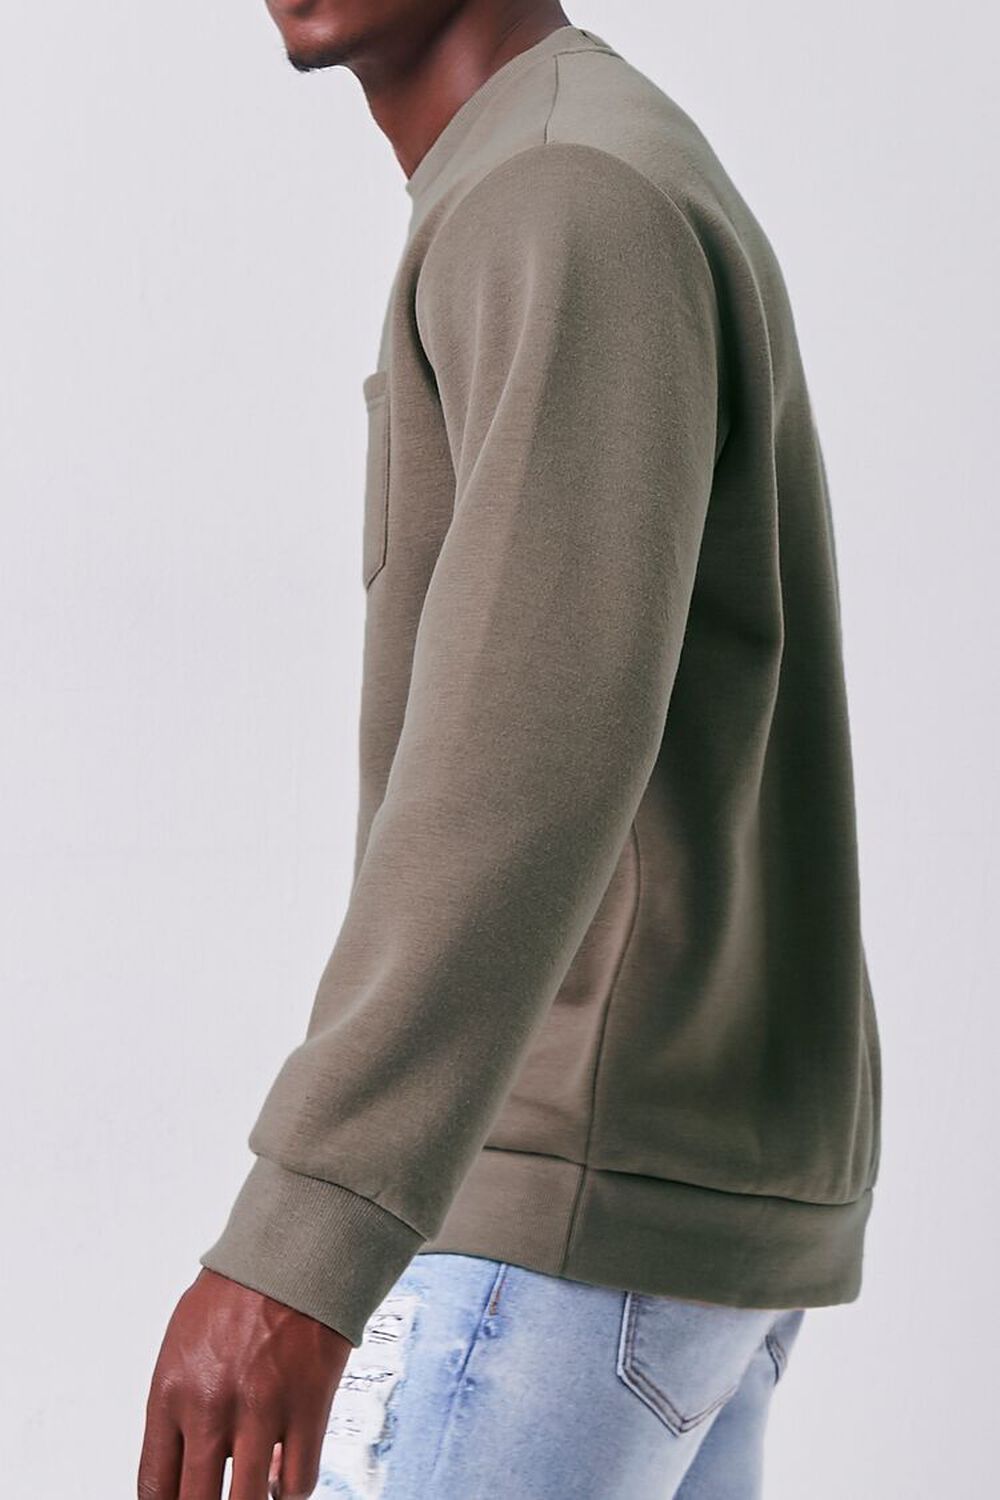 TAUPE/BROWN Roach Embroidered Graphic Sweatshirt, image 2